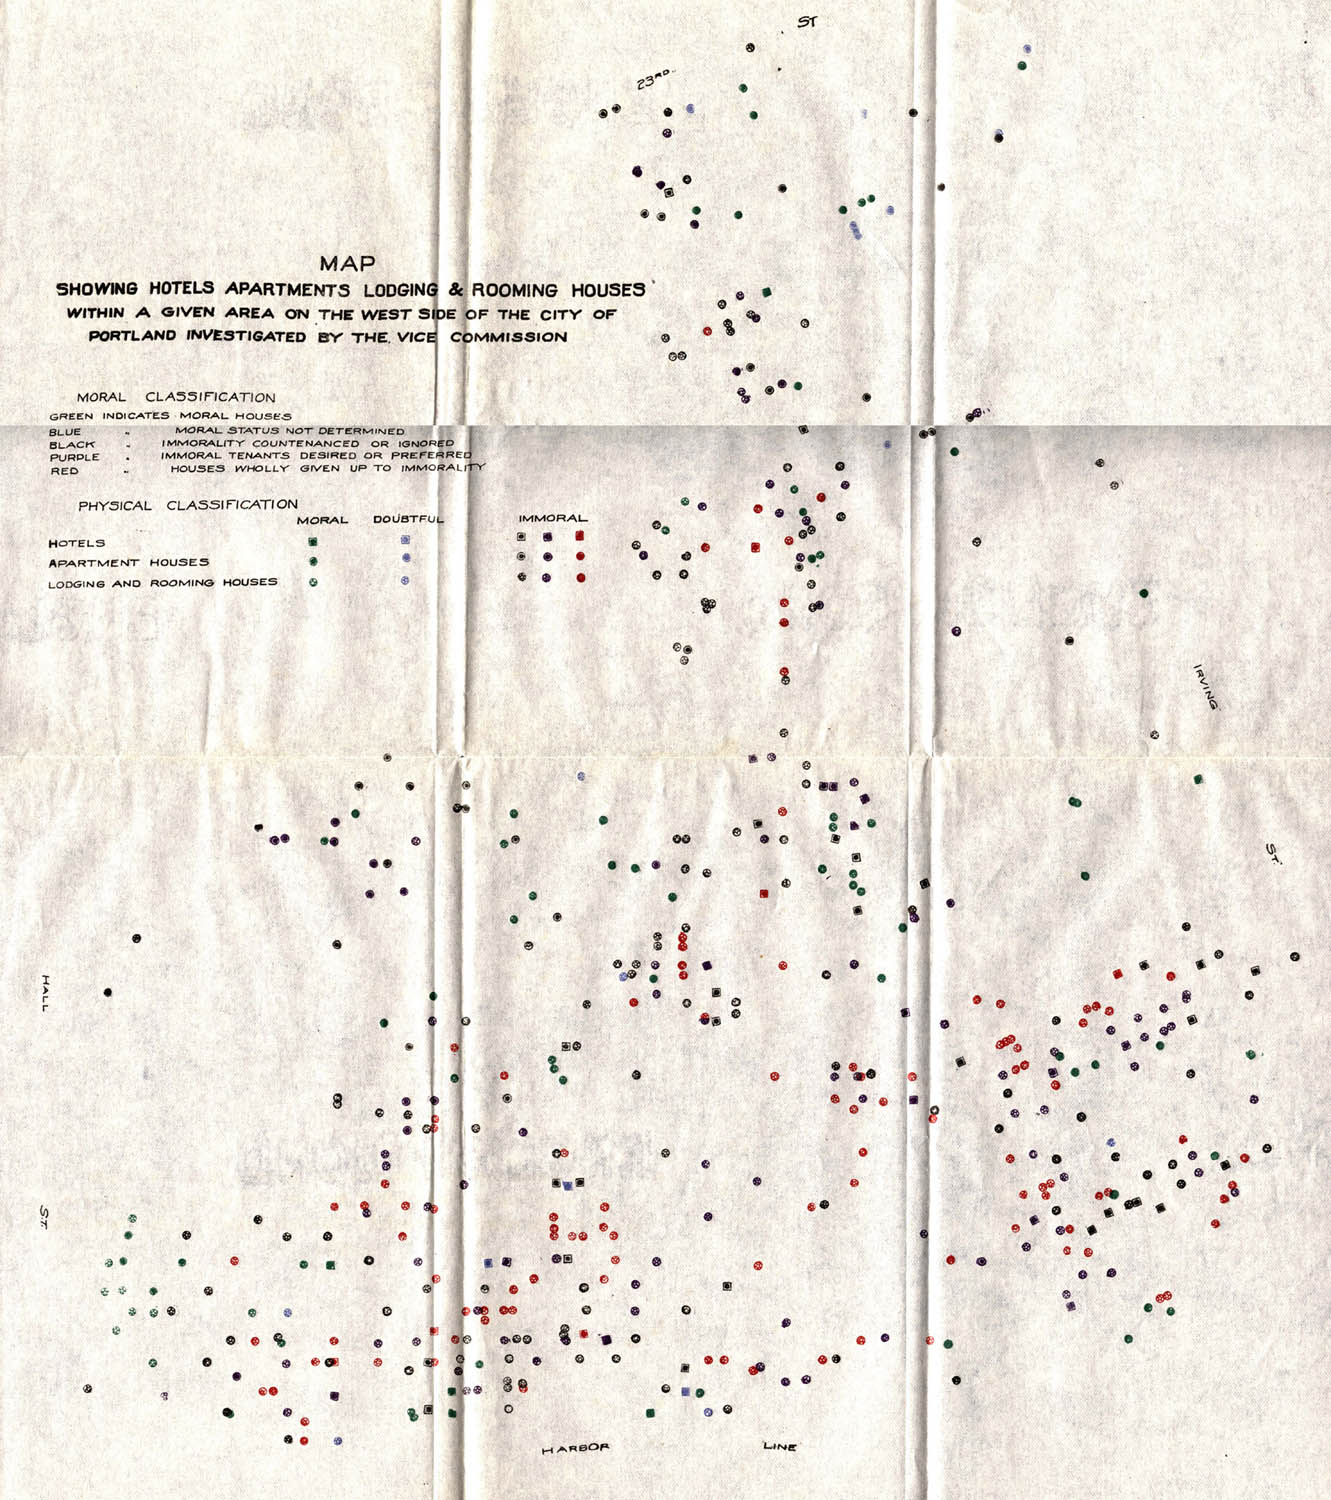 The 1913 report on vice in Portland resulted in this map assigning a different color to varying degrees of immorality at hotels, apartments, and boarding houses.  Click image to enlarge. (via BigThink.com)